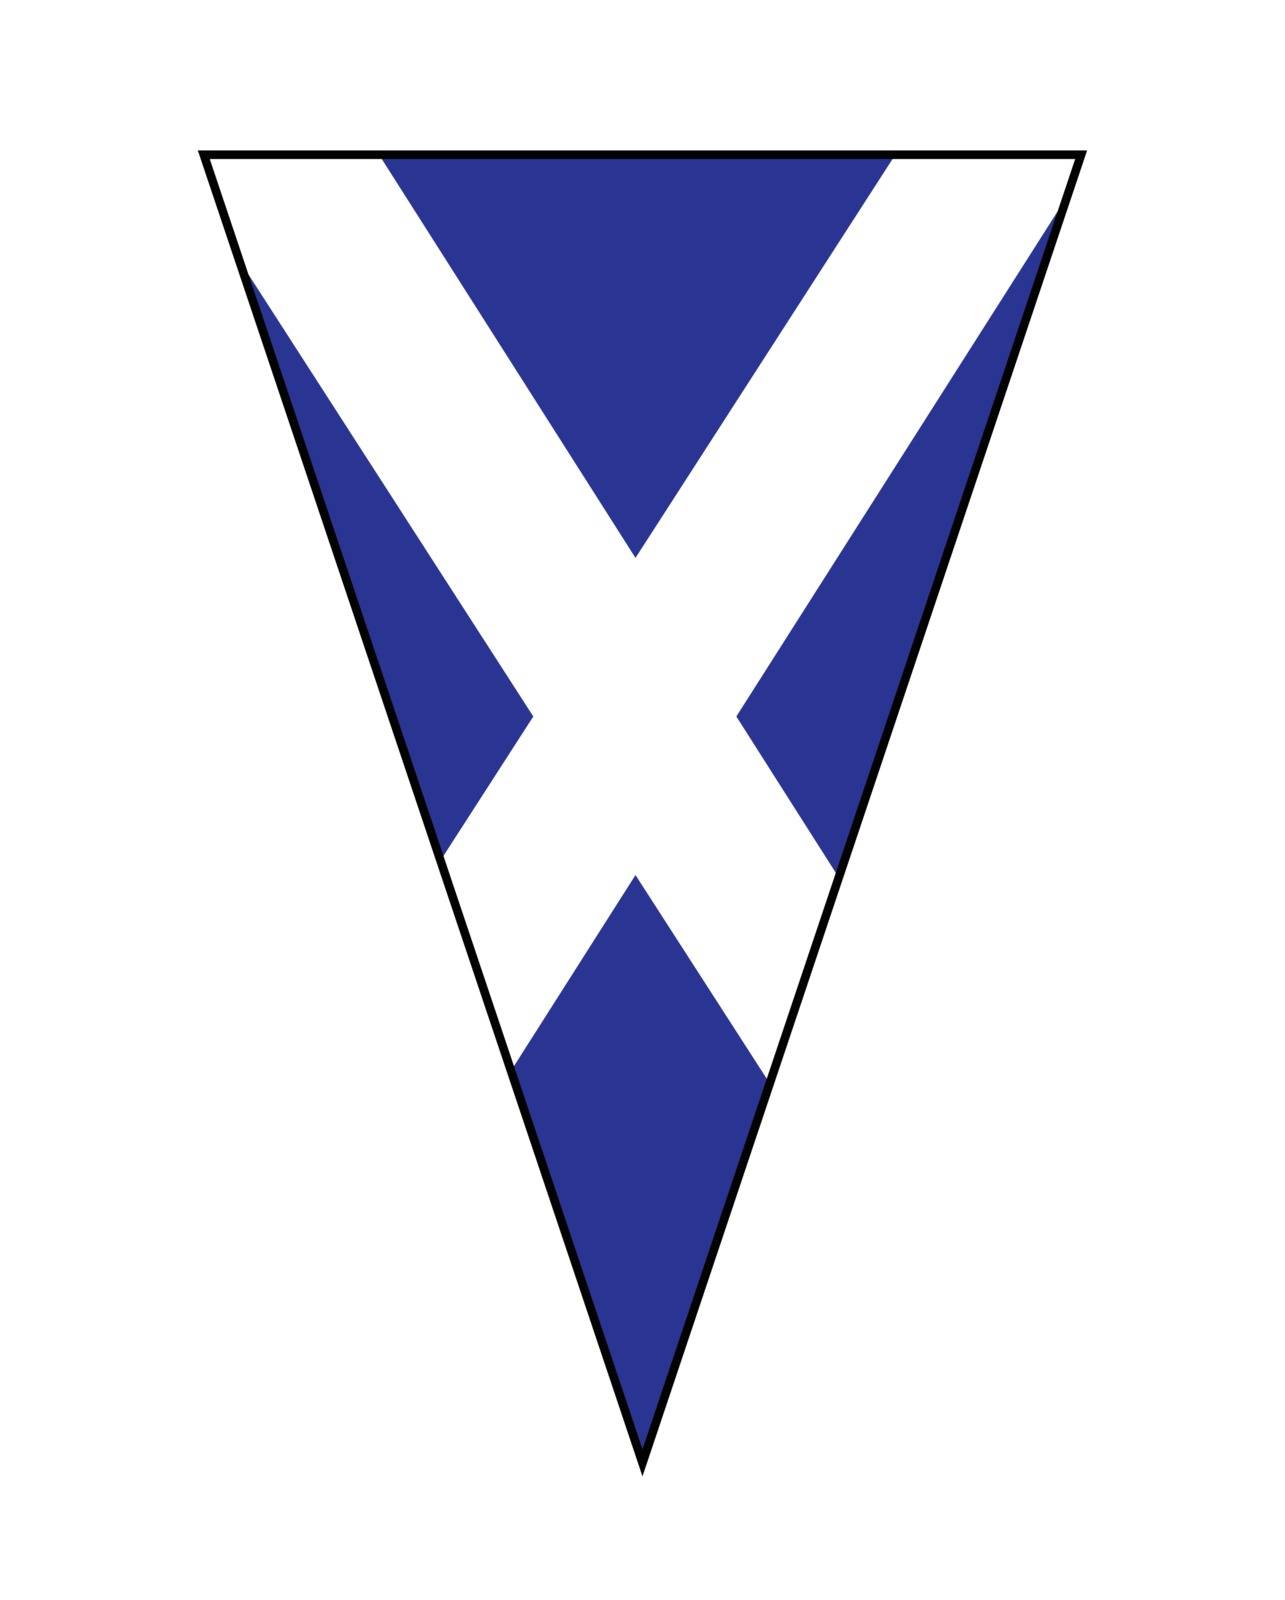 The Scottish Flag as part of a bunting